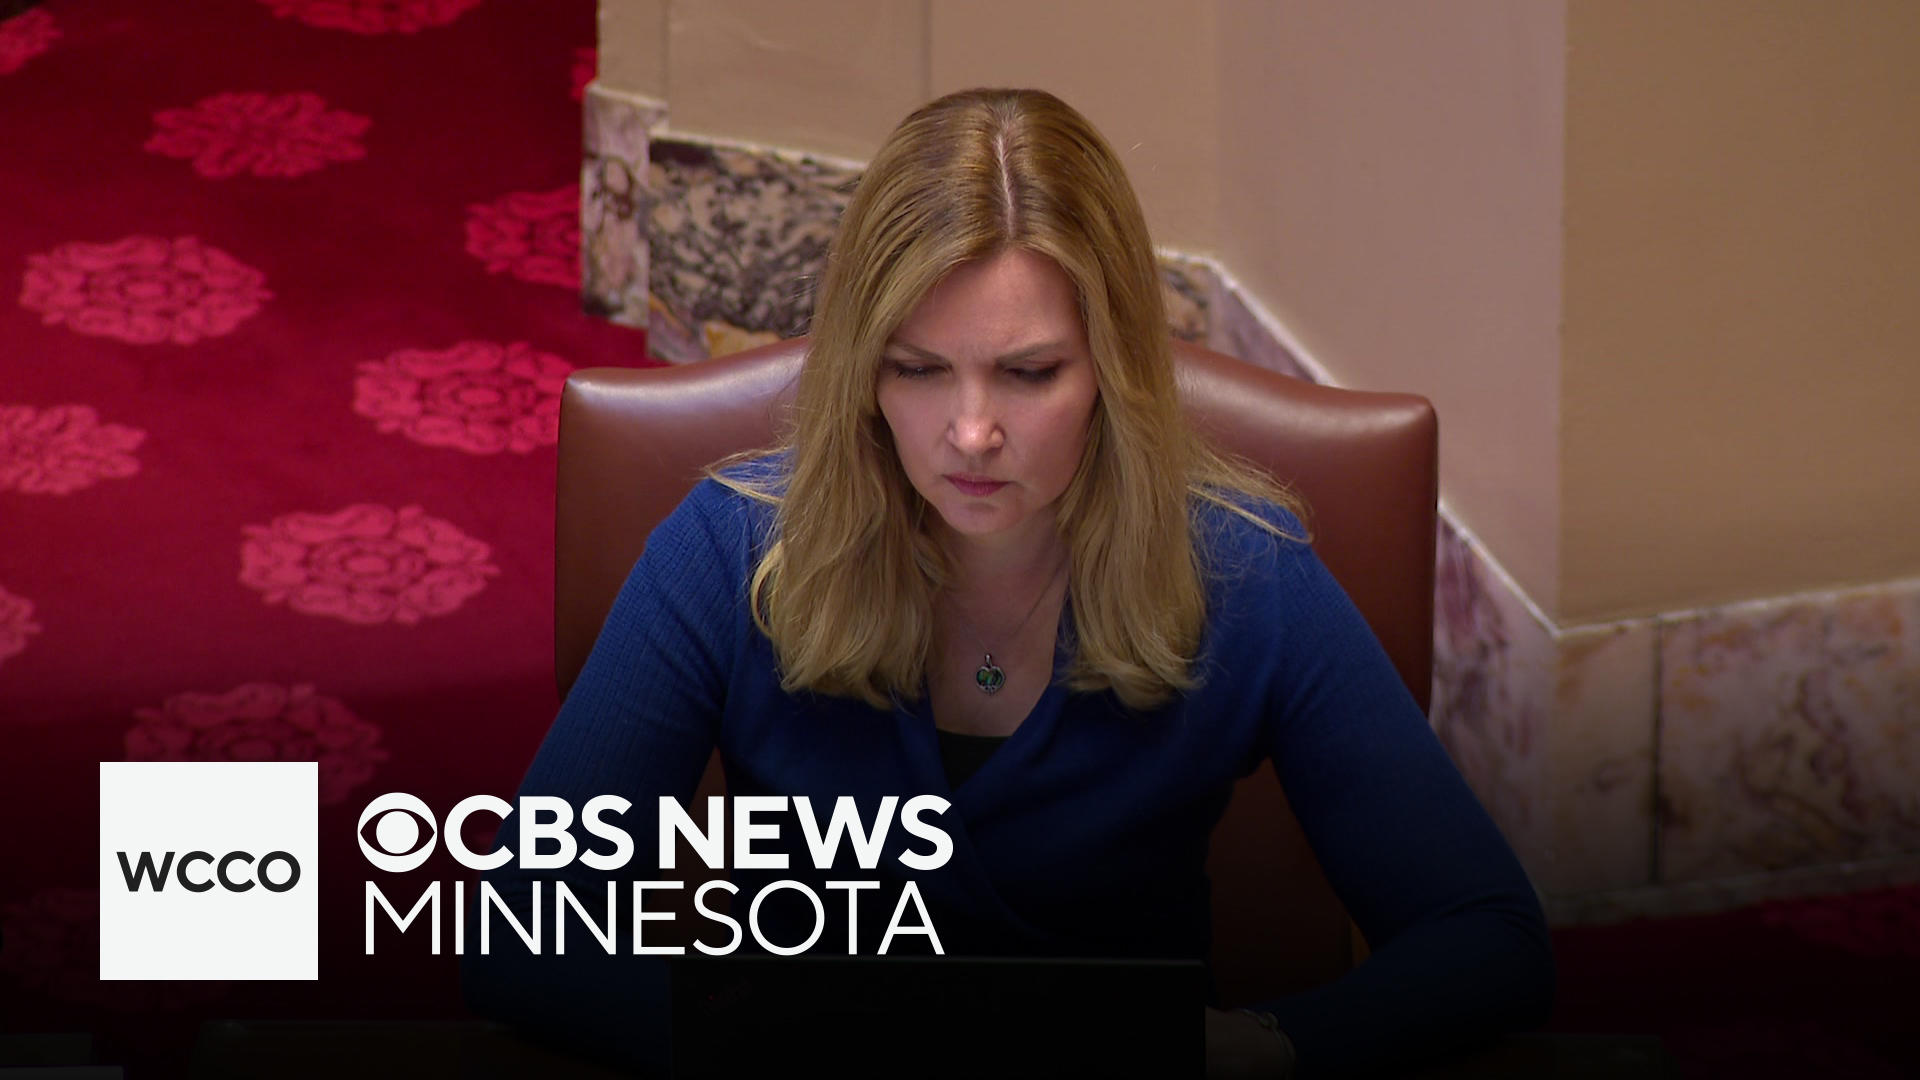 Minnesota state Sen. Nicole Mitchell removed from committees, caucus meetings amid burglary investigations